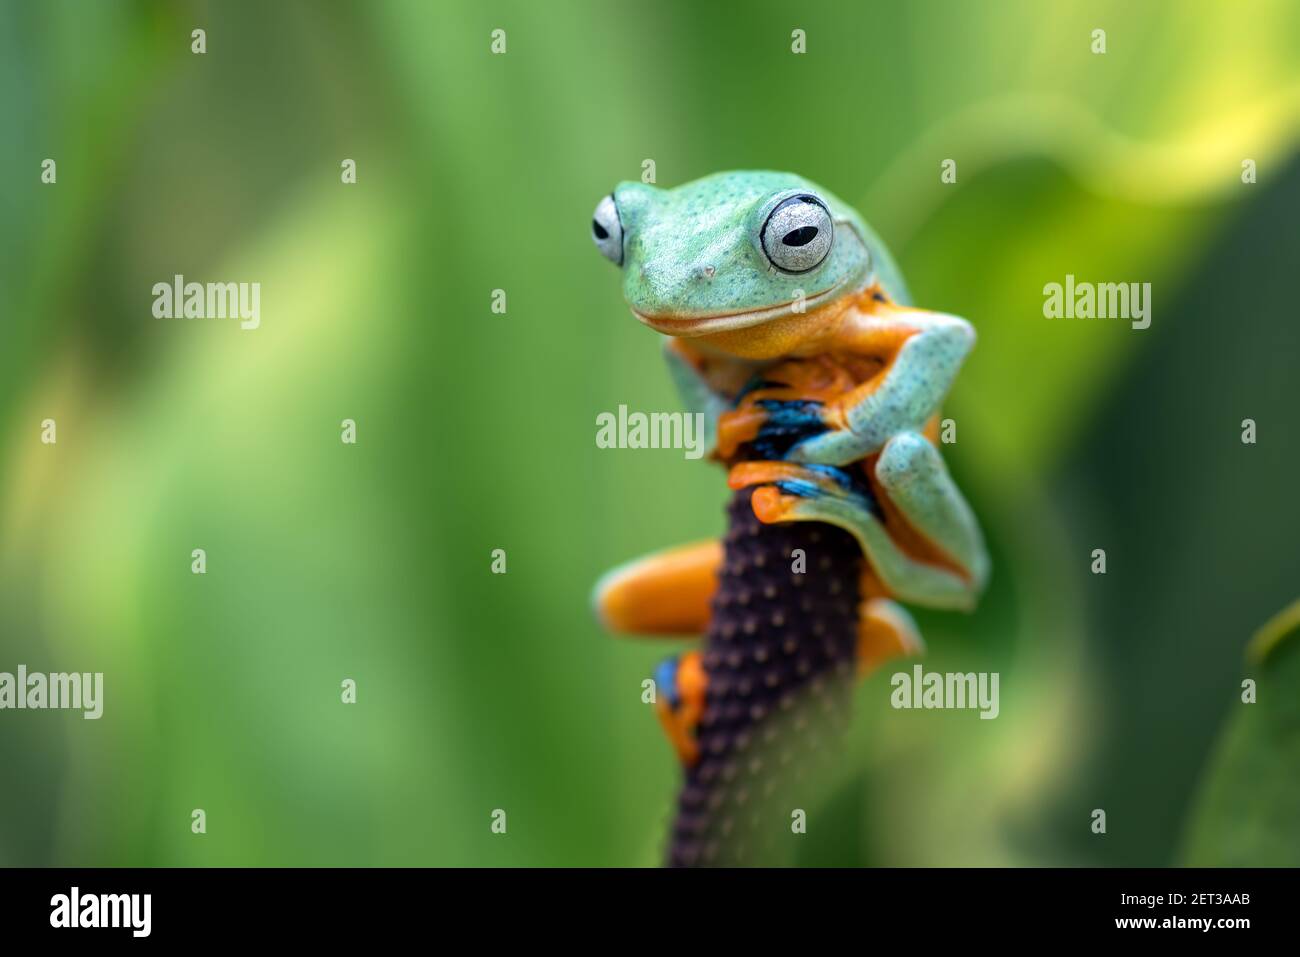 Green flying tree frog sitting on an anthurium leaf, Indonesia Stock Photo